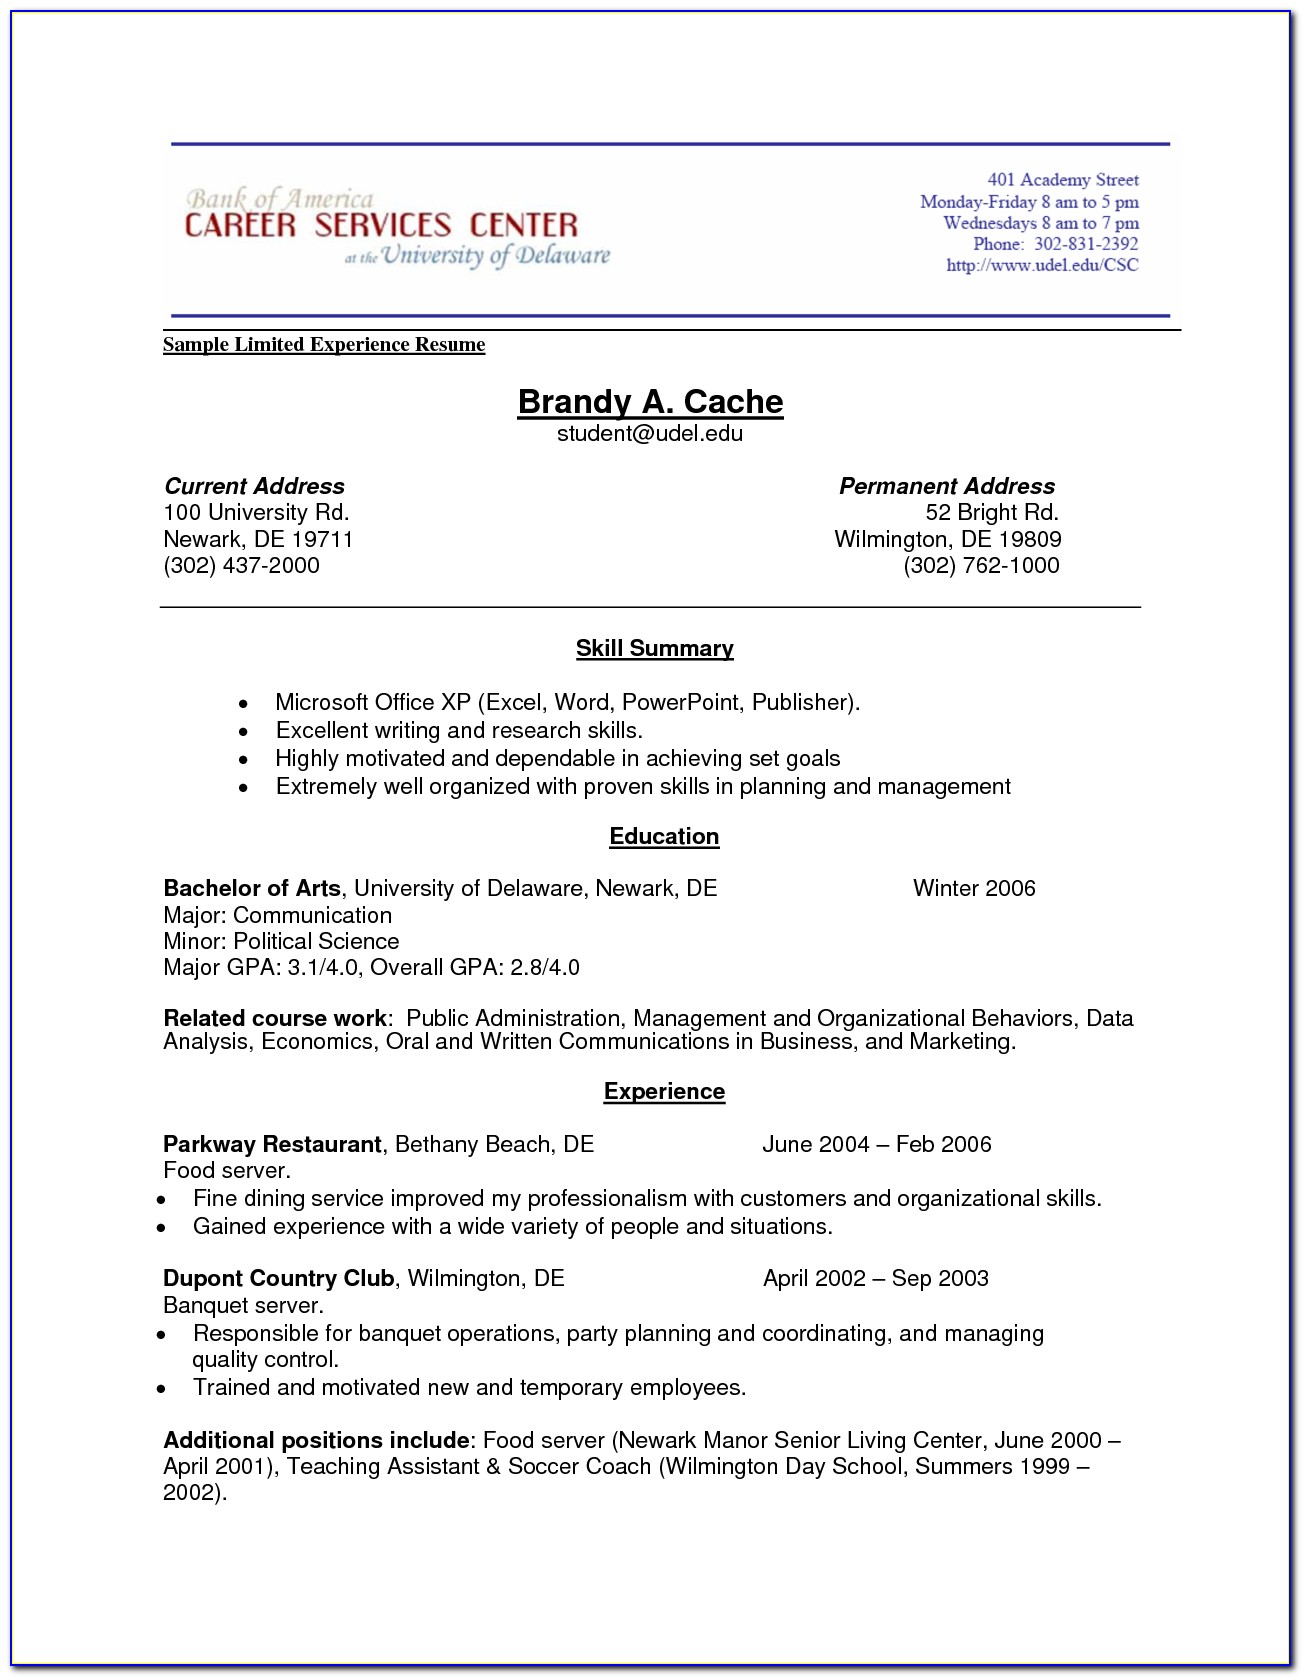 Resume Builder With No Work Experience